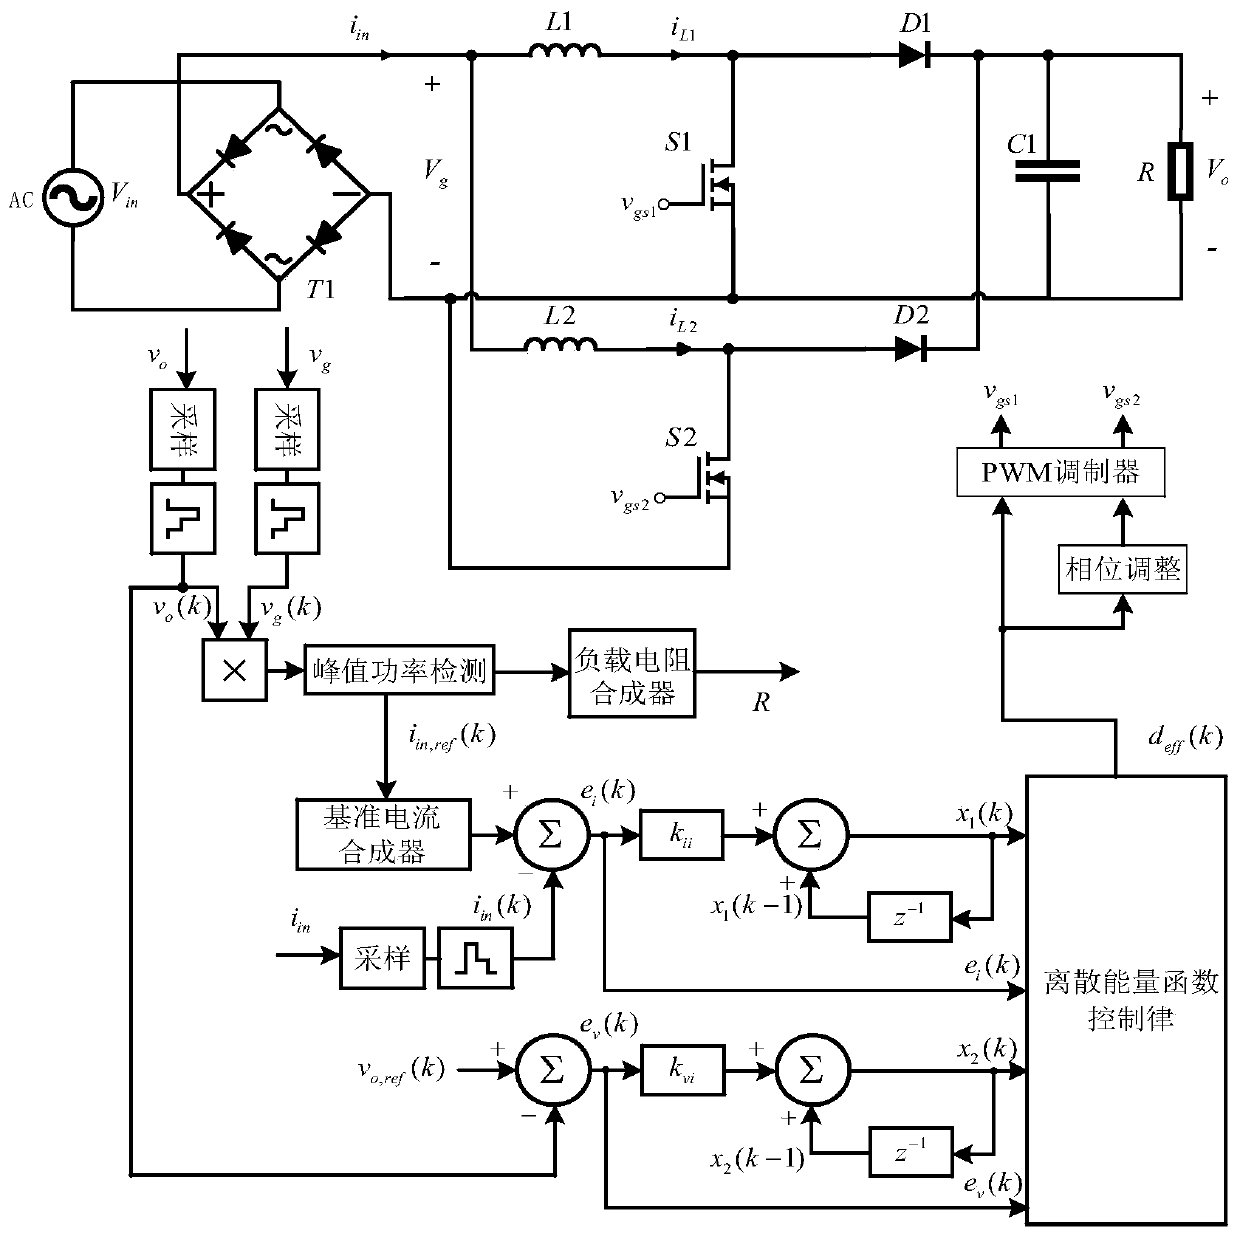 Non-linear control method for on-board charger PFC converter based on discrete energy function control